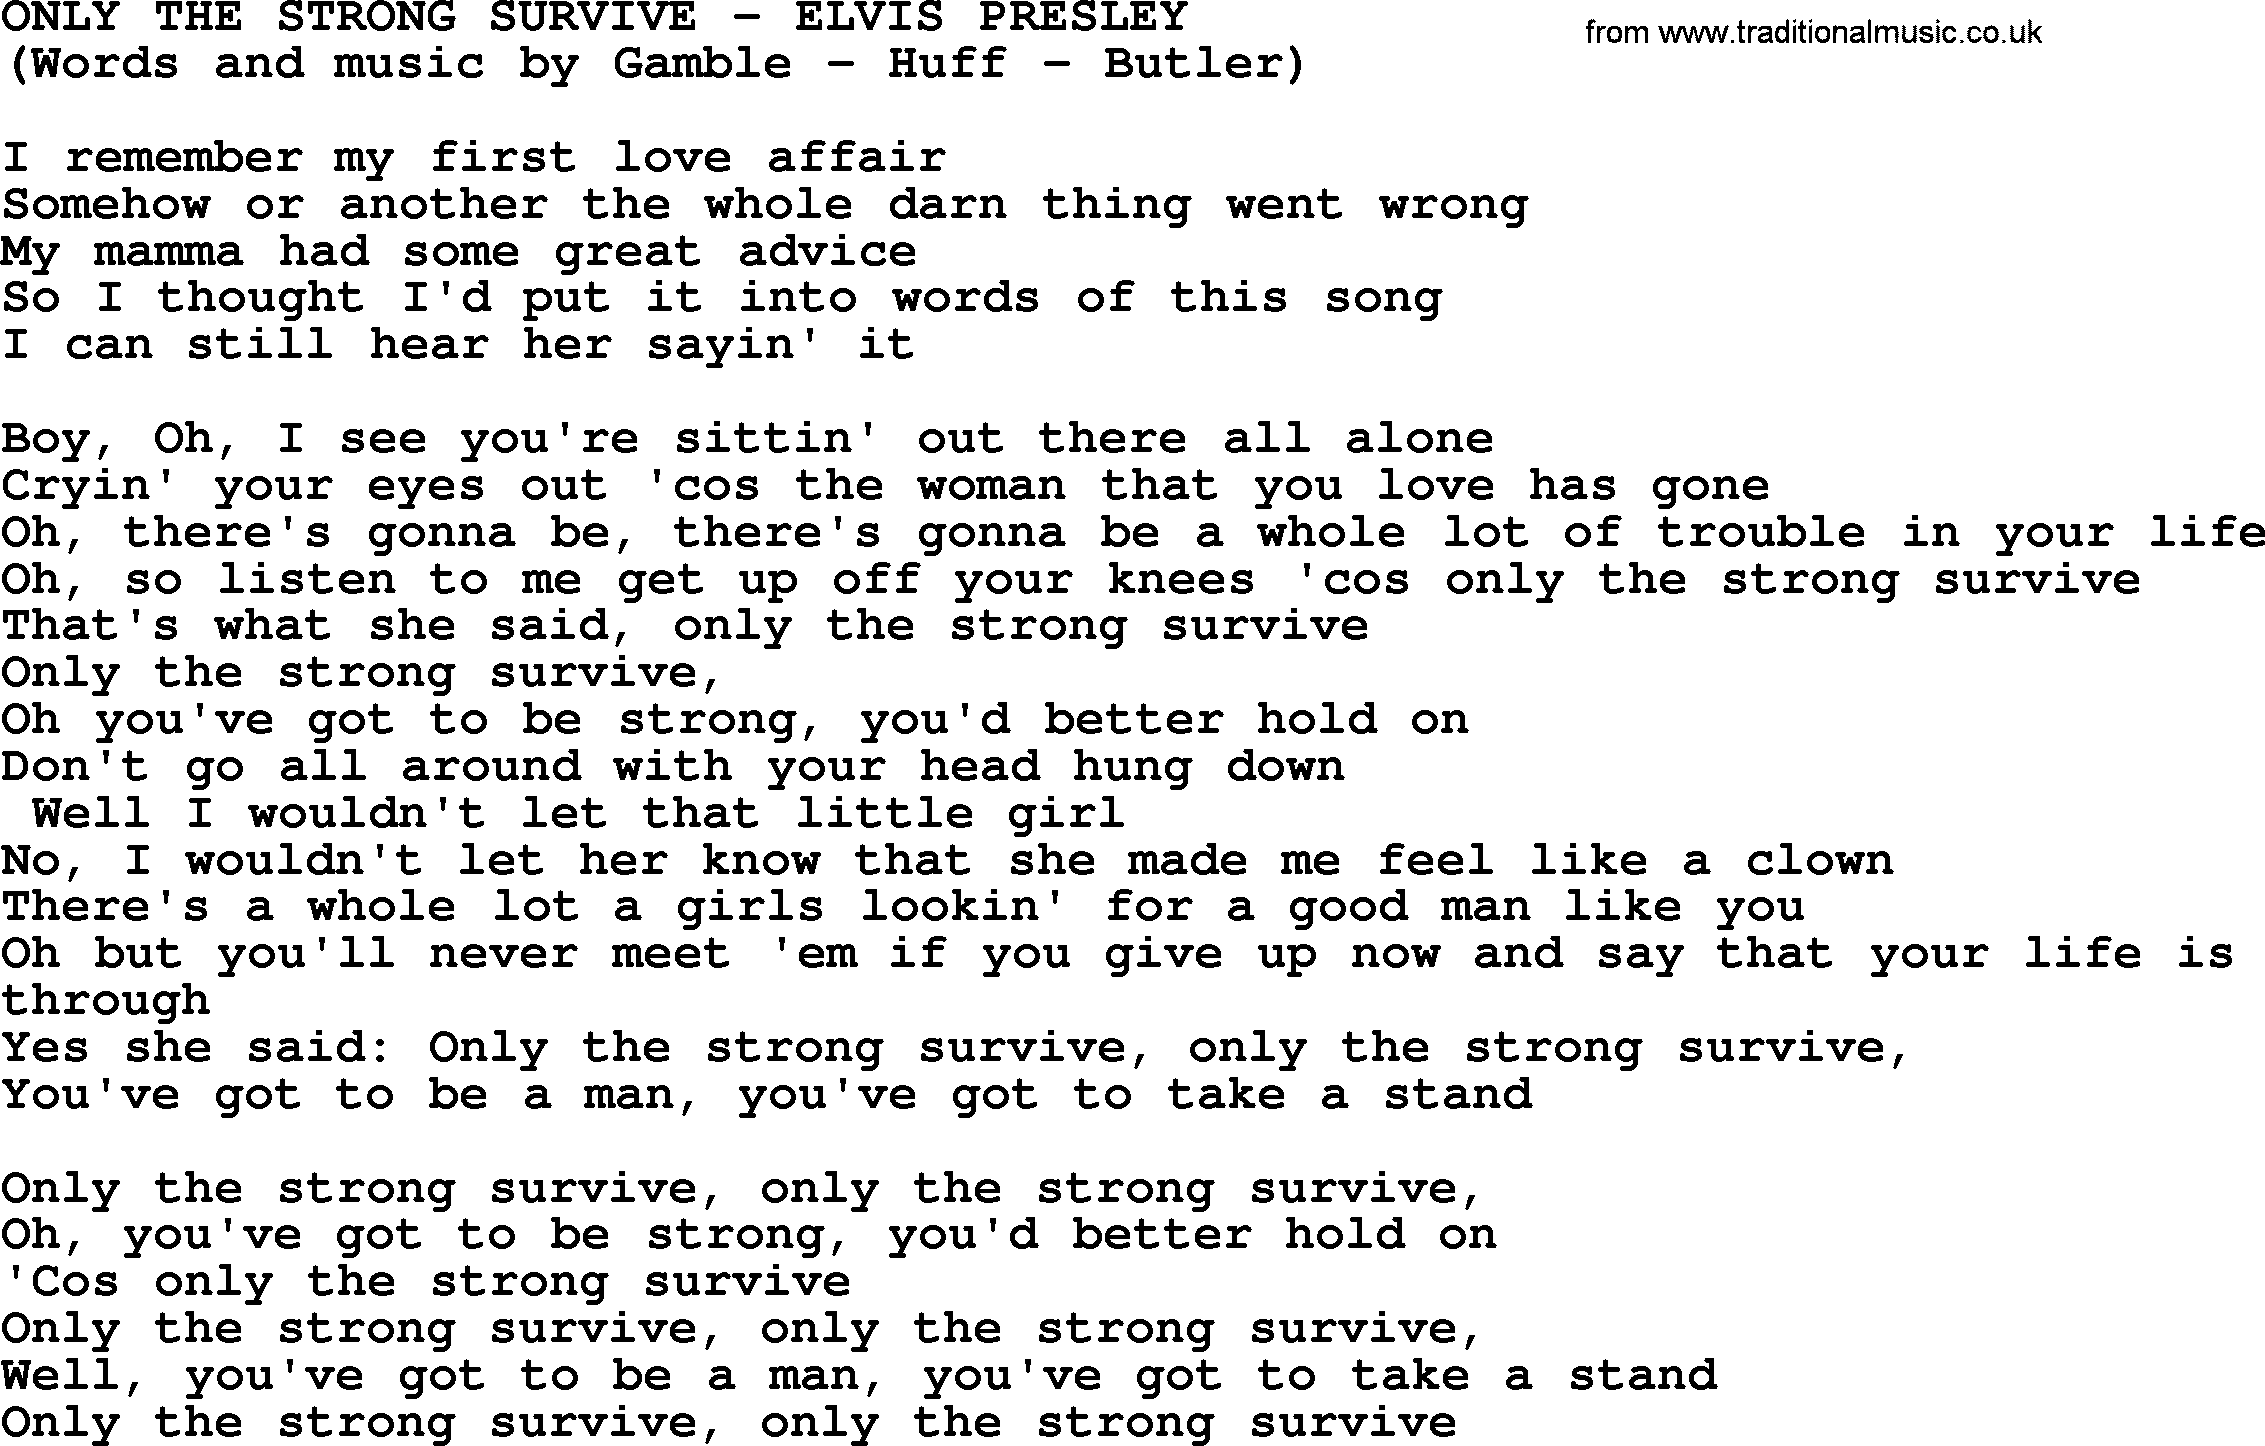 Elvis Presley song: Only The Strong Survive lyrics